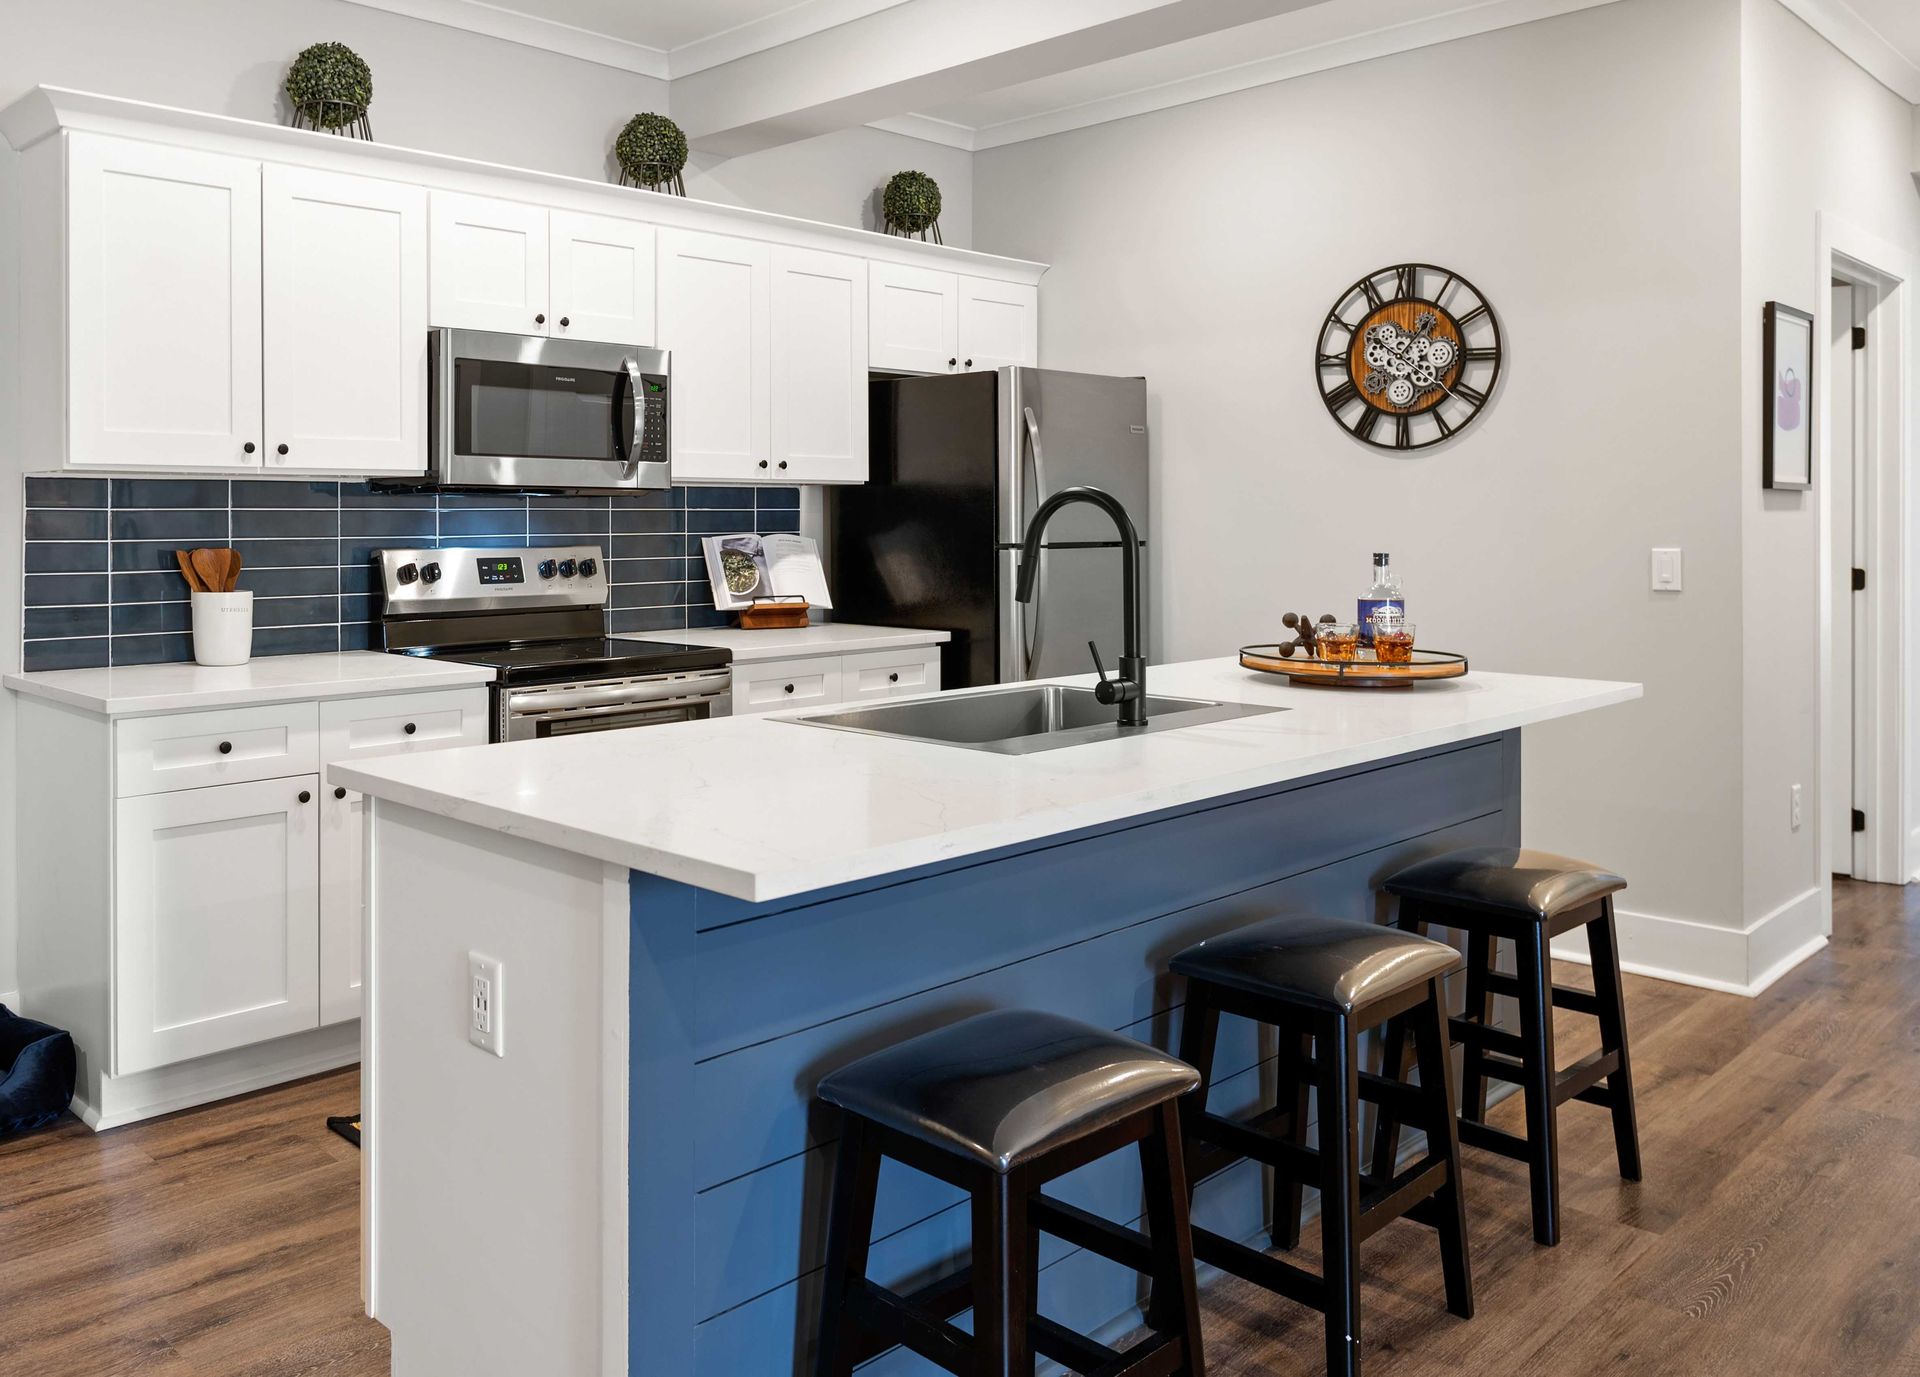 Apartment kitchen with white cabinets, a blue island, stools, a refrigerator, and a clock on the wall.